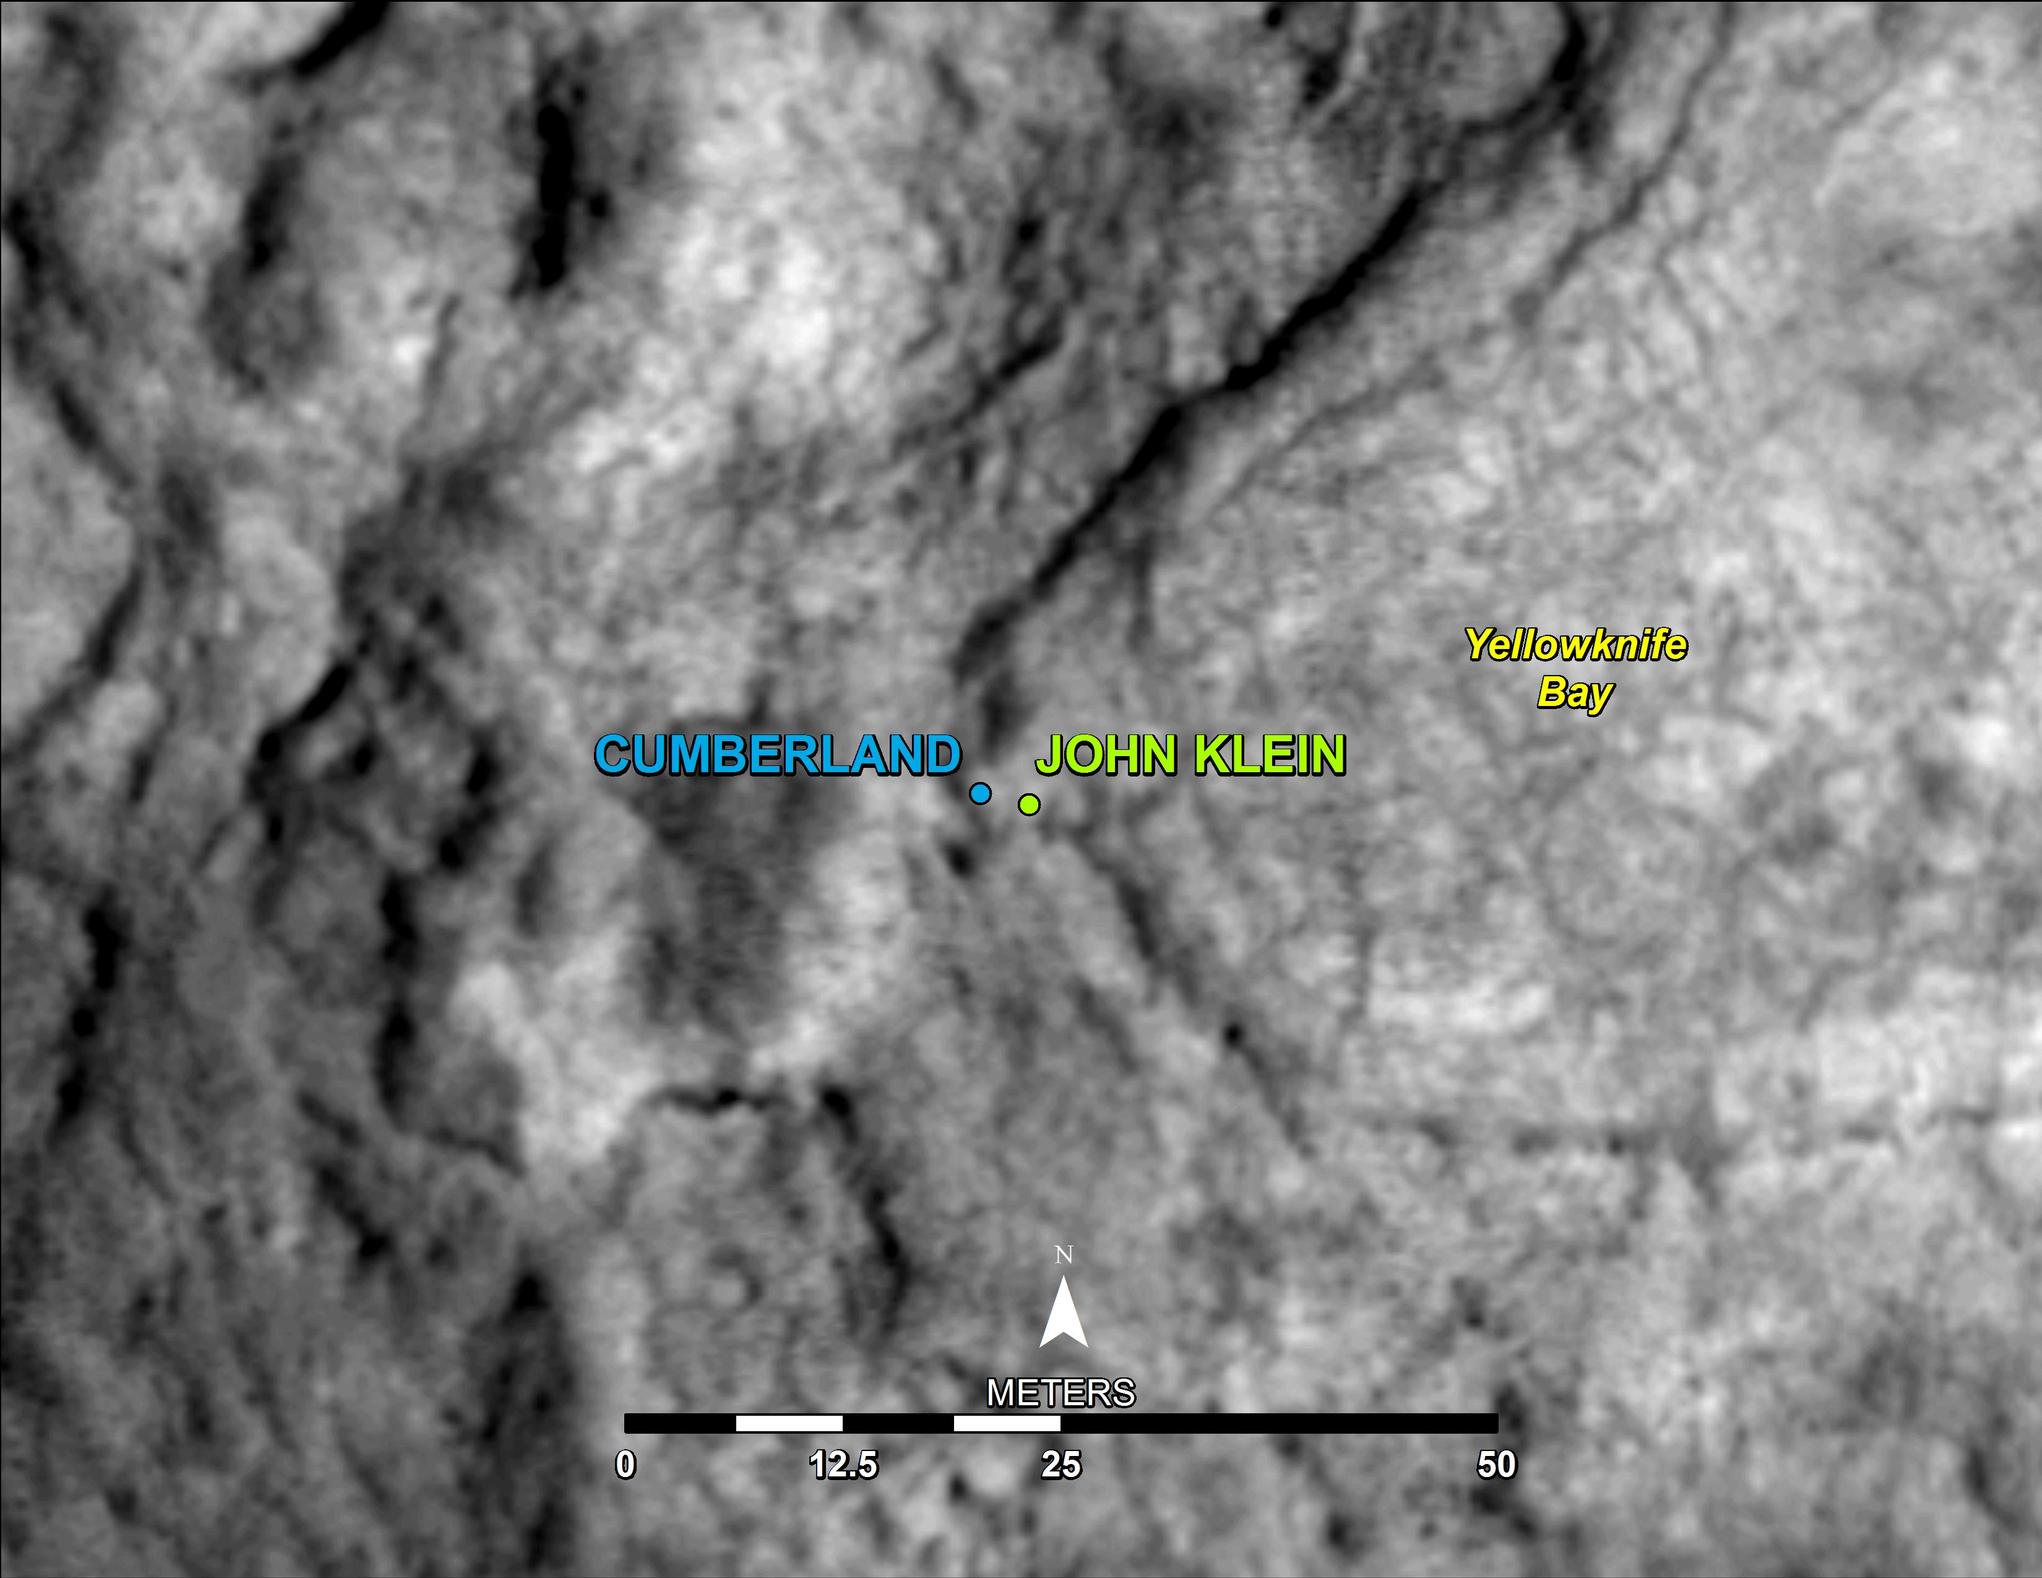 This map shows the location of "Cumberland," the second rock-drilling target for NASA's Mars rover Curiosity, in relation to the rover's first drilling target, "John Klein," within the southwestern lobe of a shallow depression called "Yellowknife Bay."